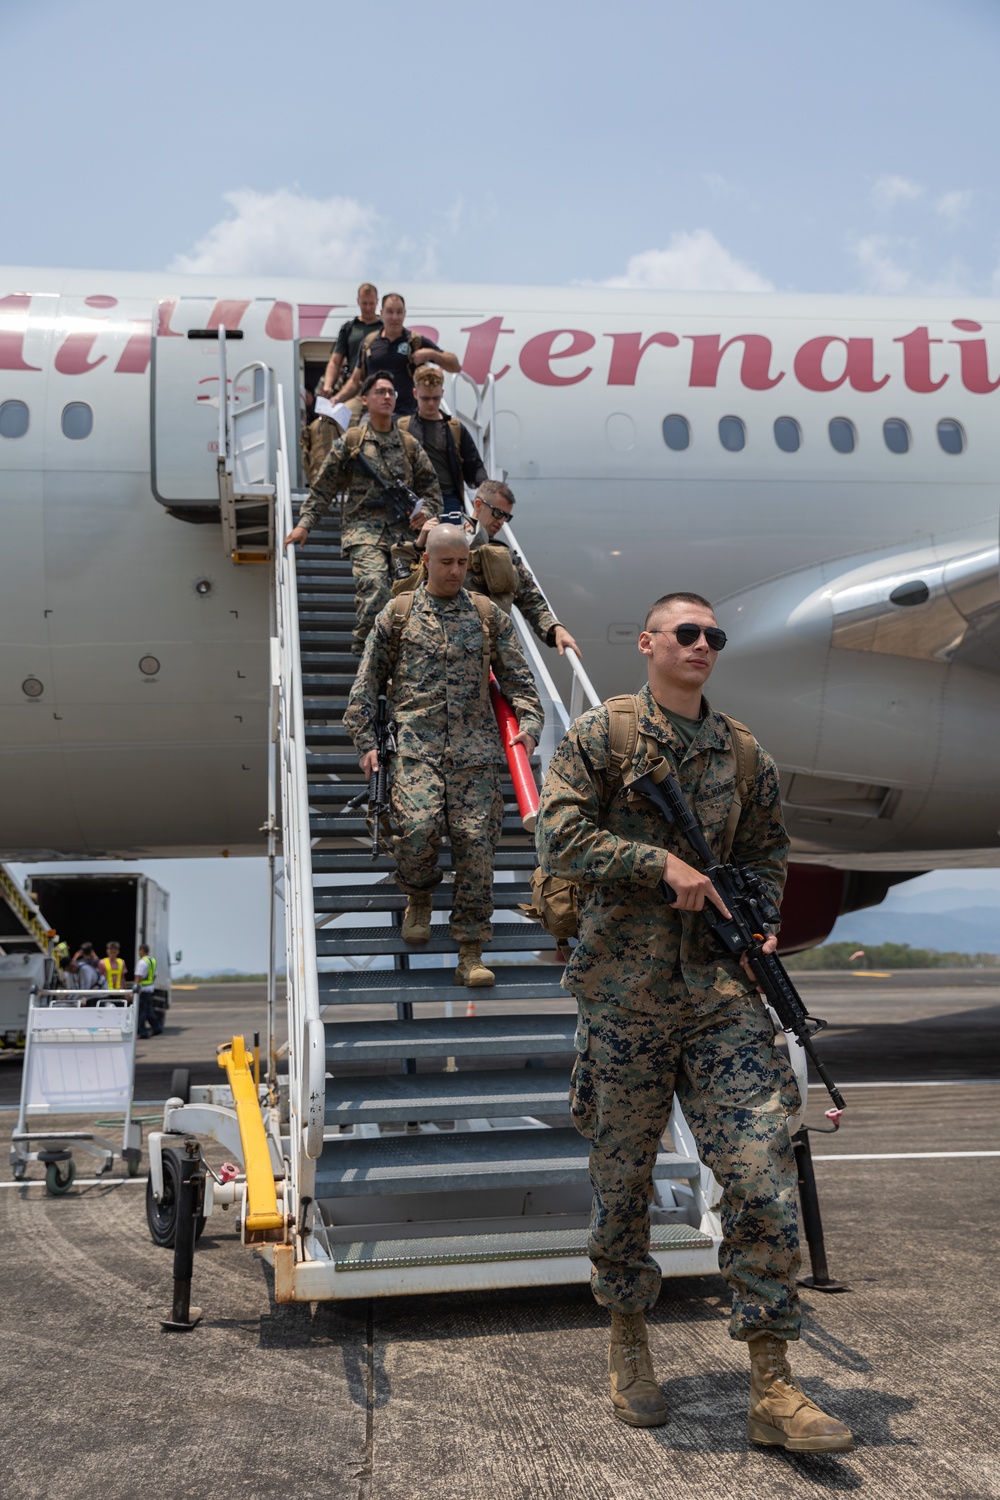 Balikatan 23 | U.S. Marines with 1st MAW and 3rd MARDIV land in the Philippines in support of Balikatan